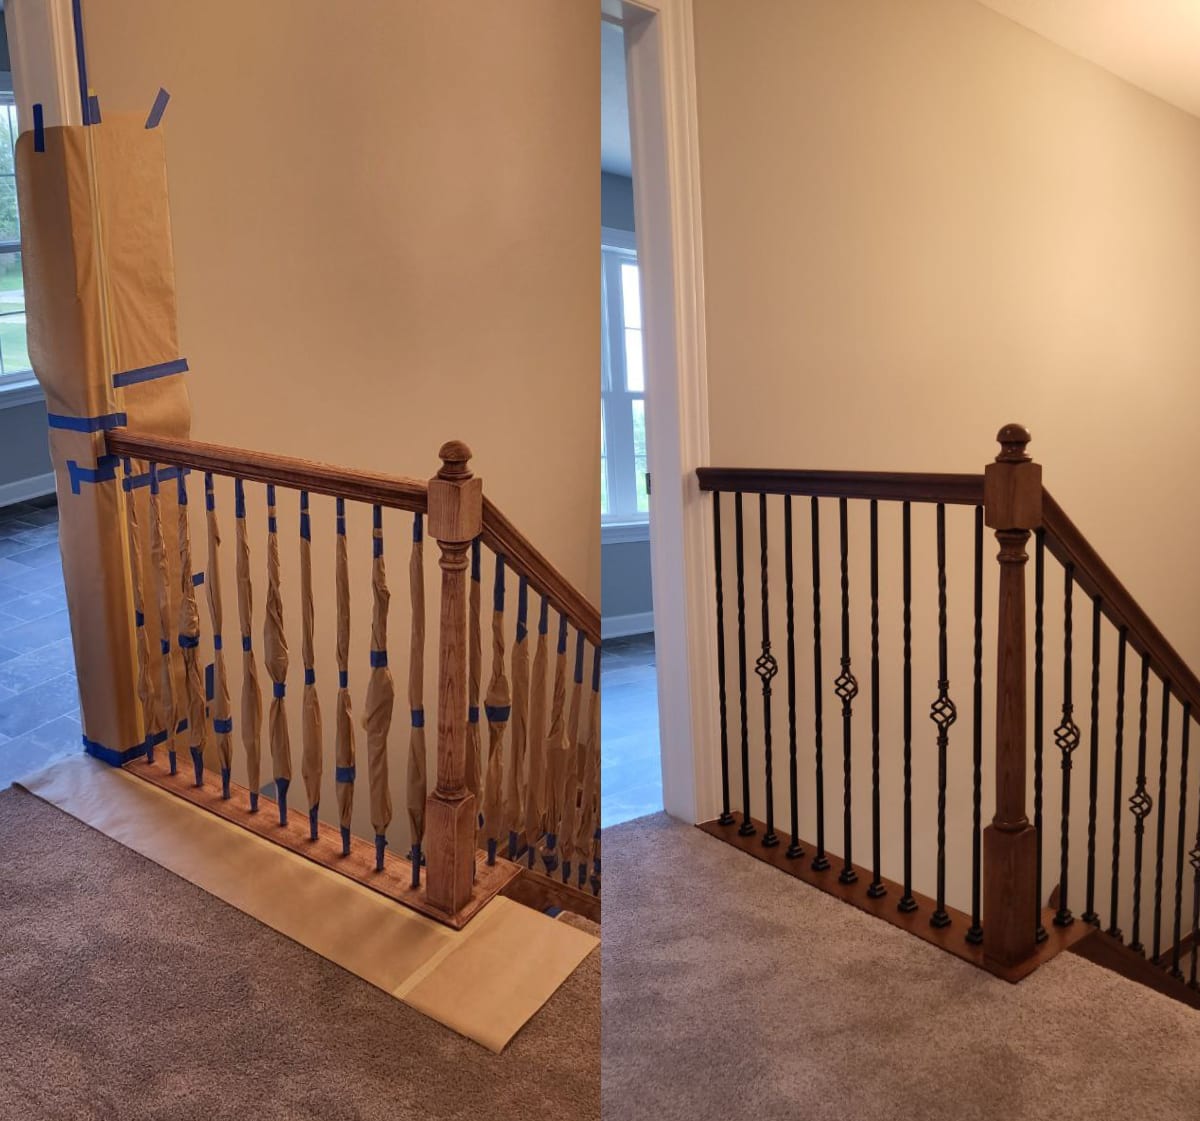 before picture of stairs at top with painters tape and cardboard prepped and after picture of beautiful dark stain